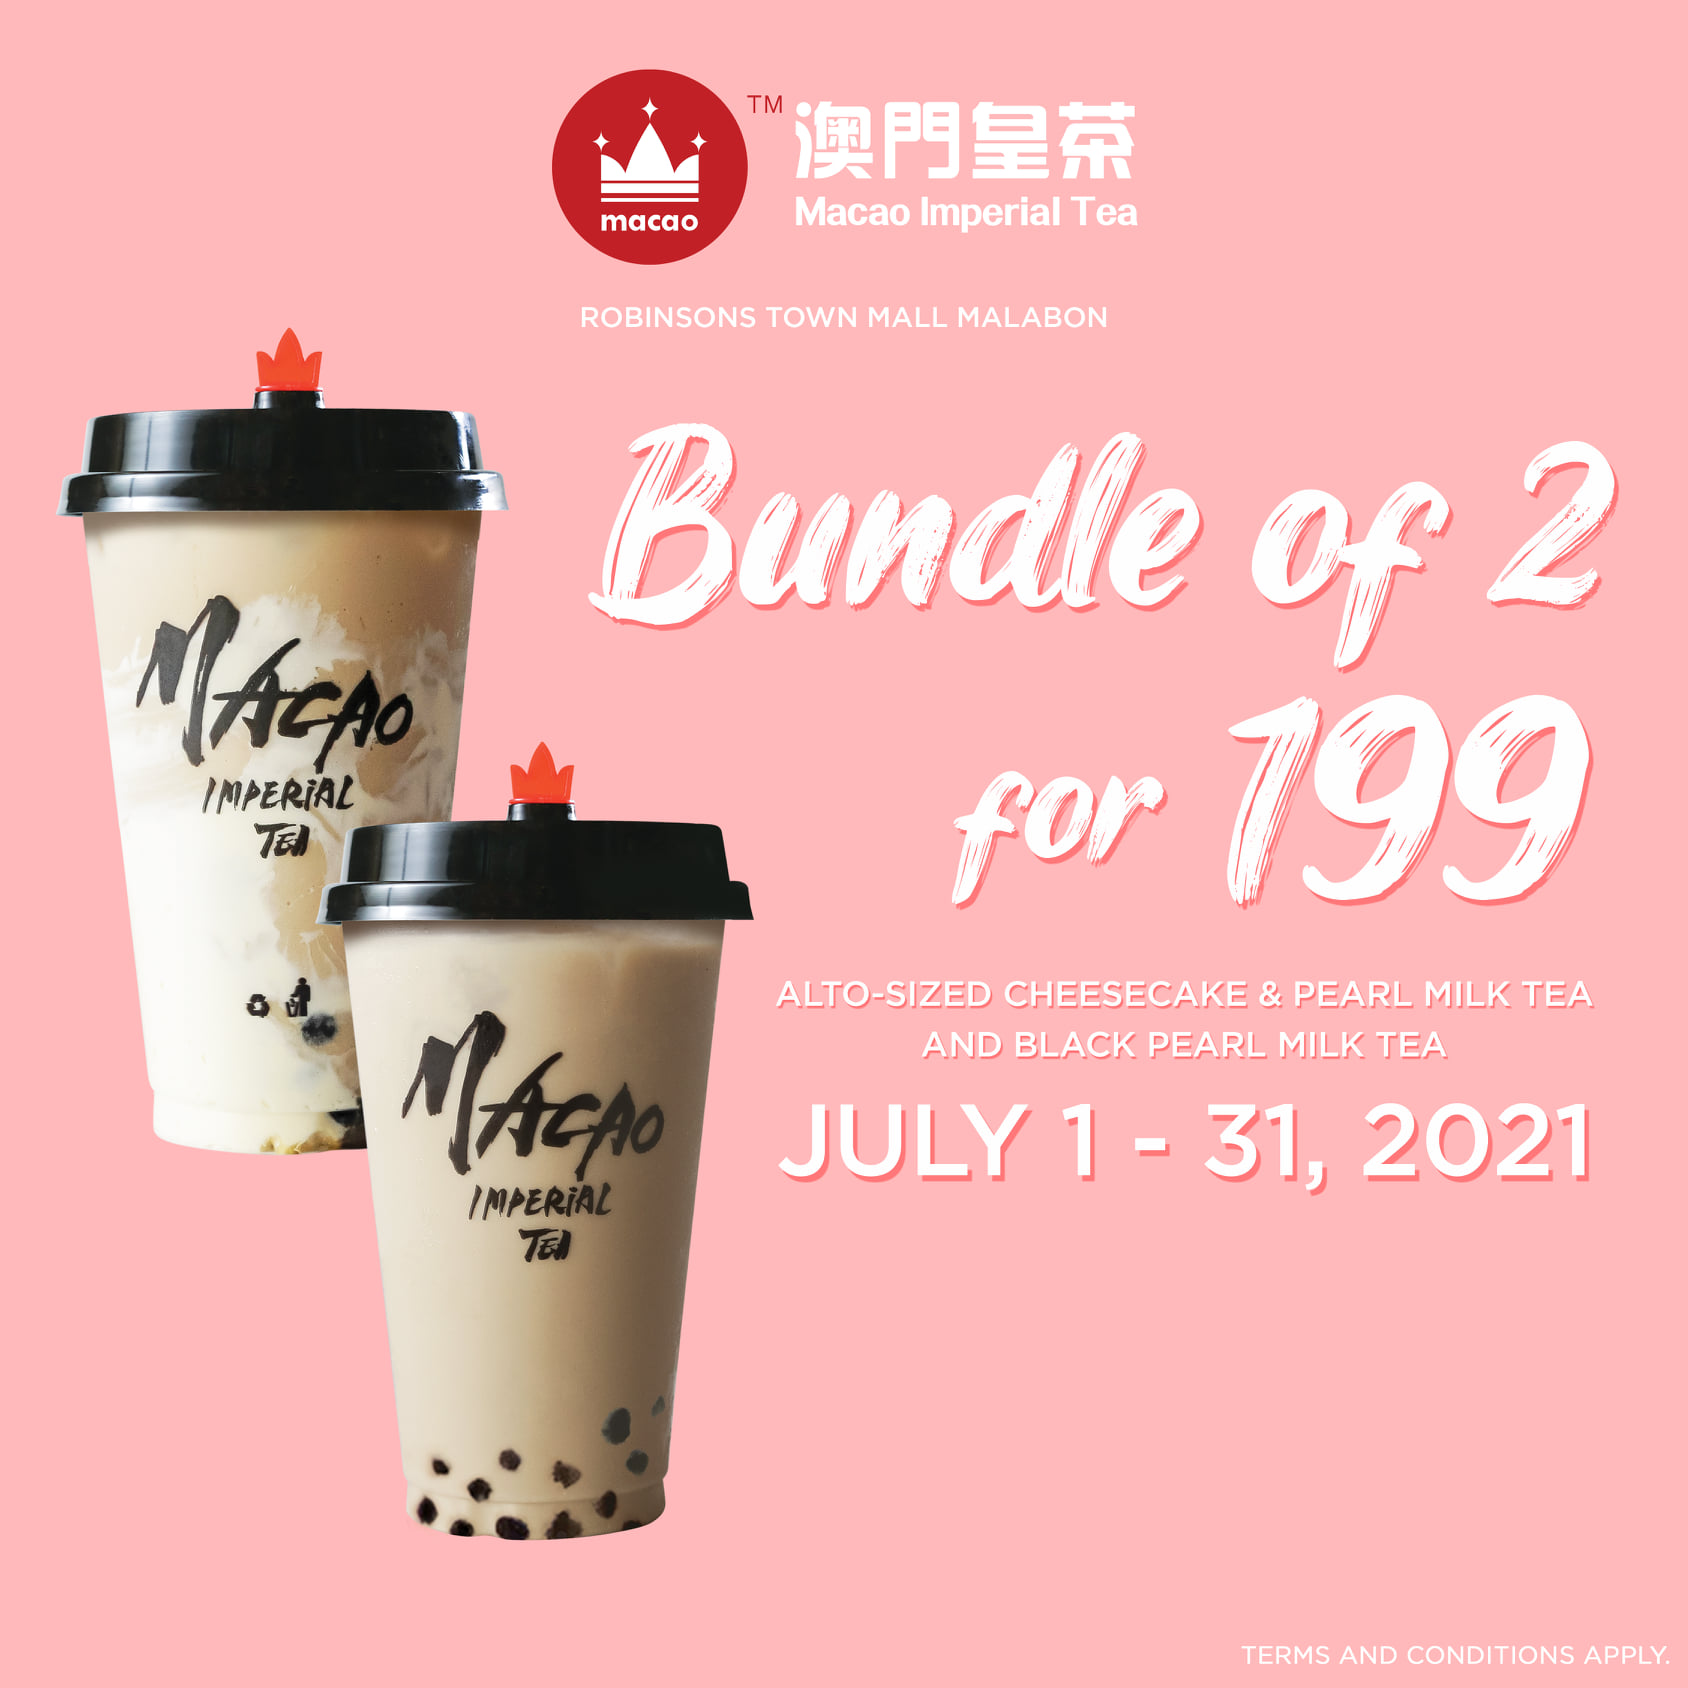 Macao Imperial Tea's Deals of the Month for July 2021